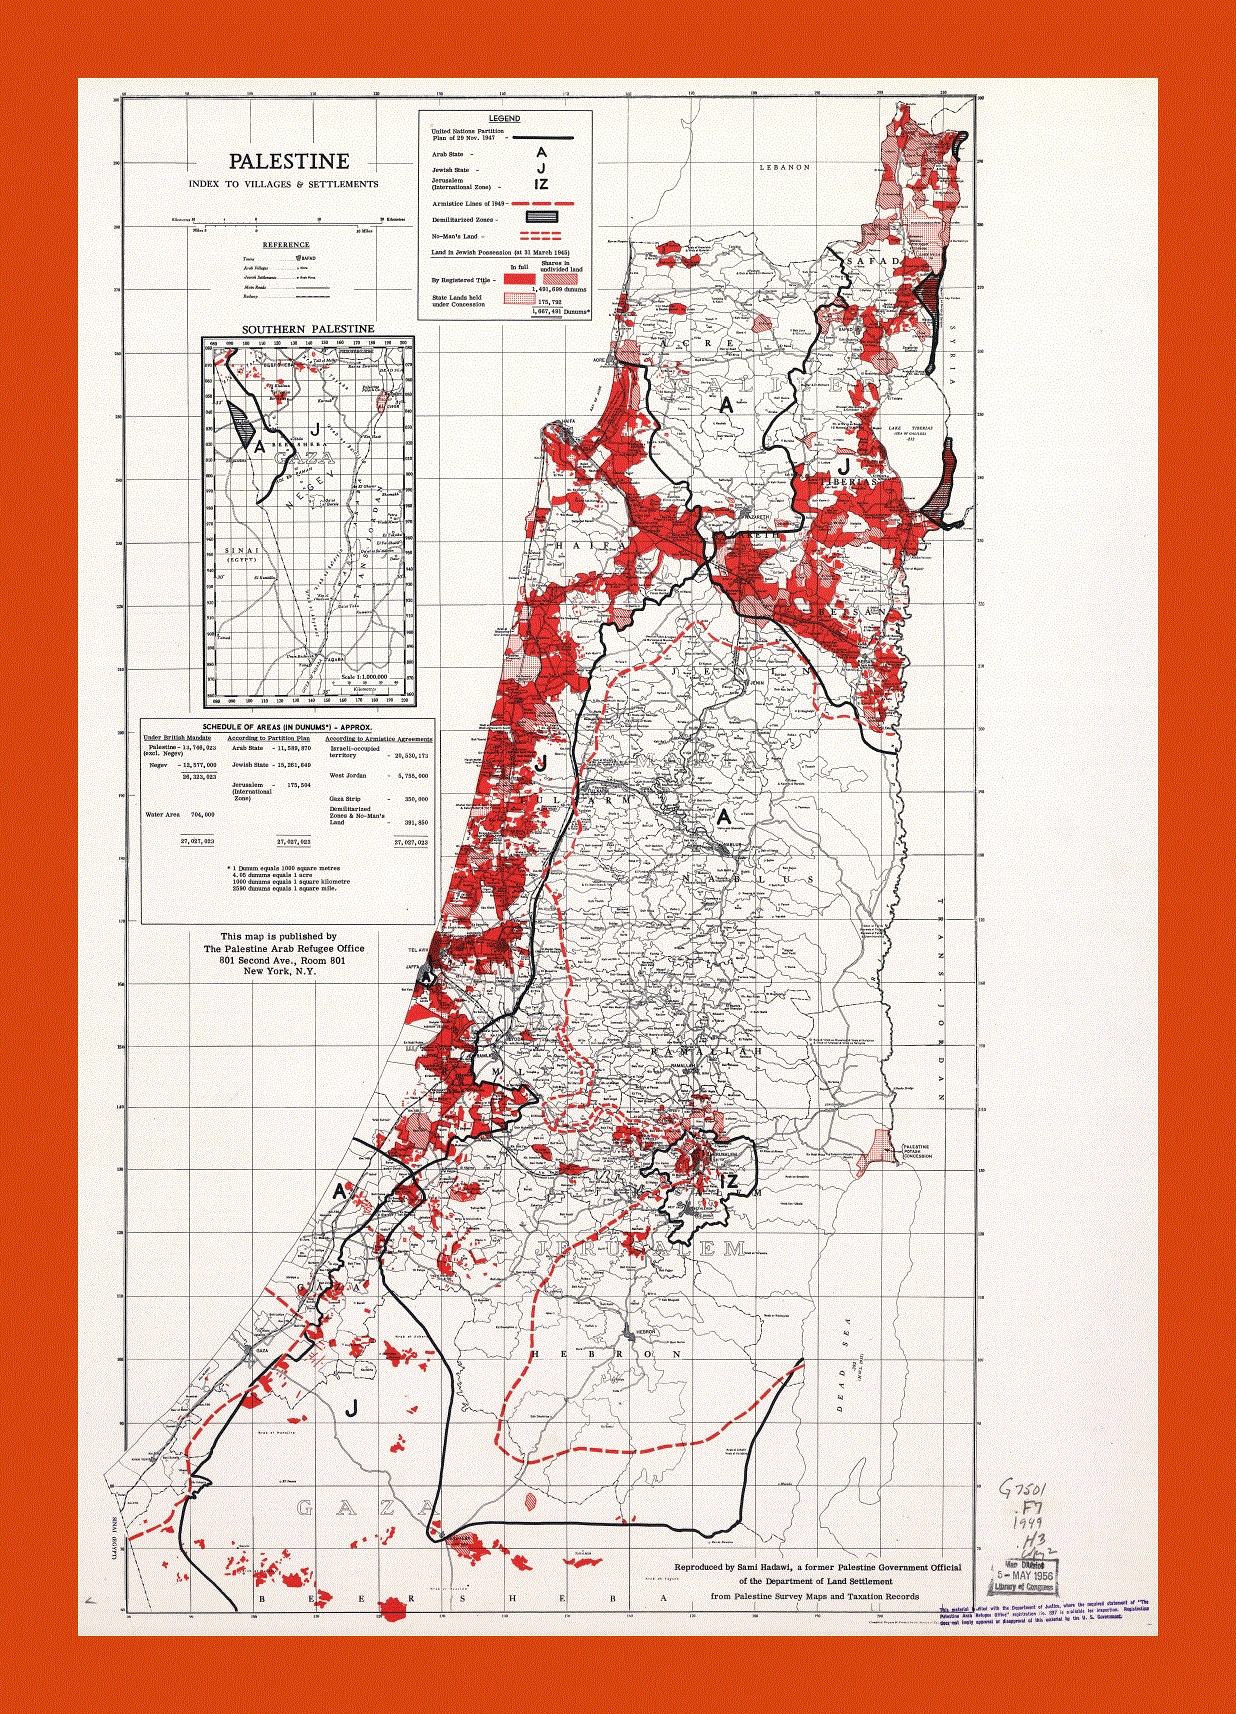 Old map of Palestine - 1949